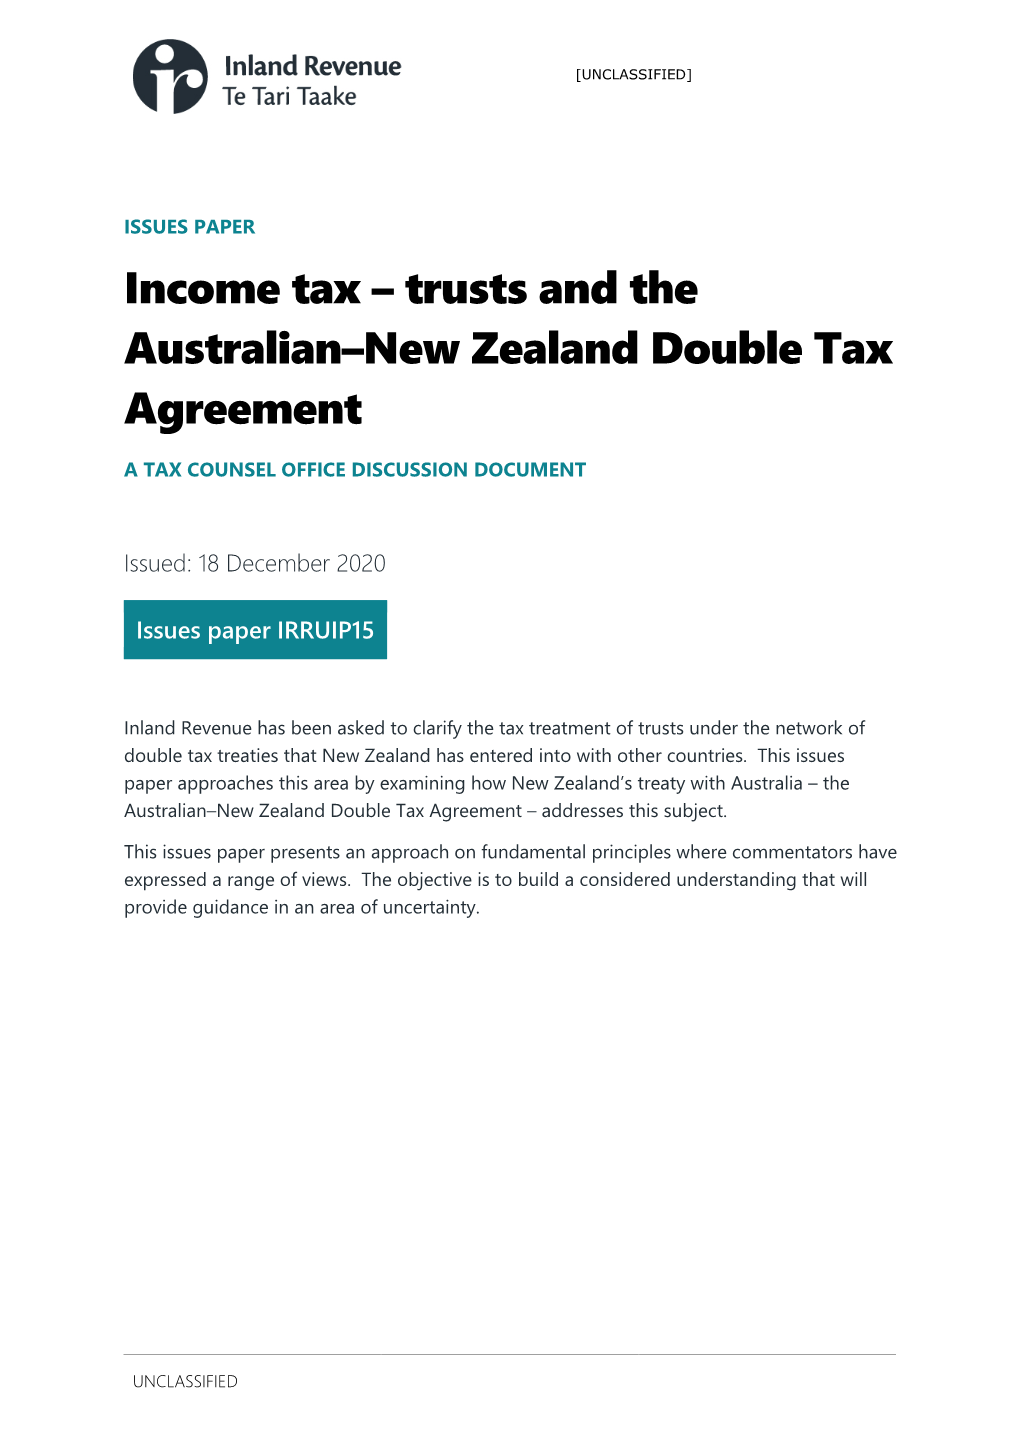 Trusts and the Australian–New Zealand Double Tax Agreement